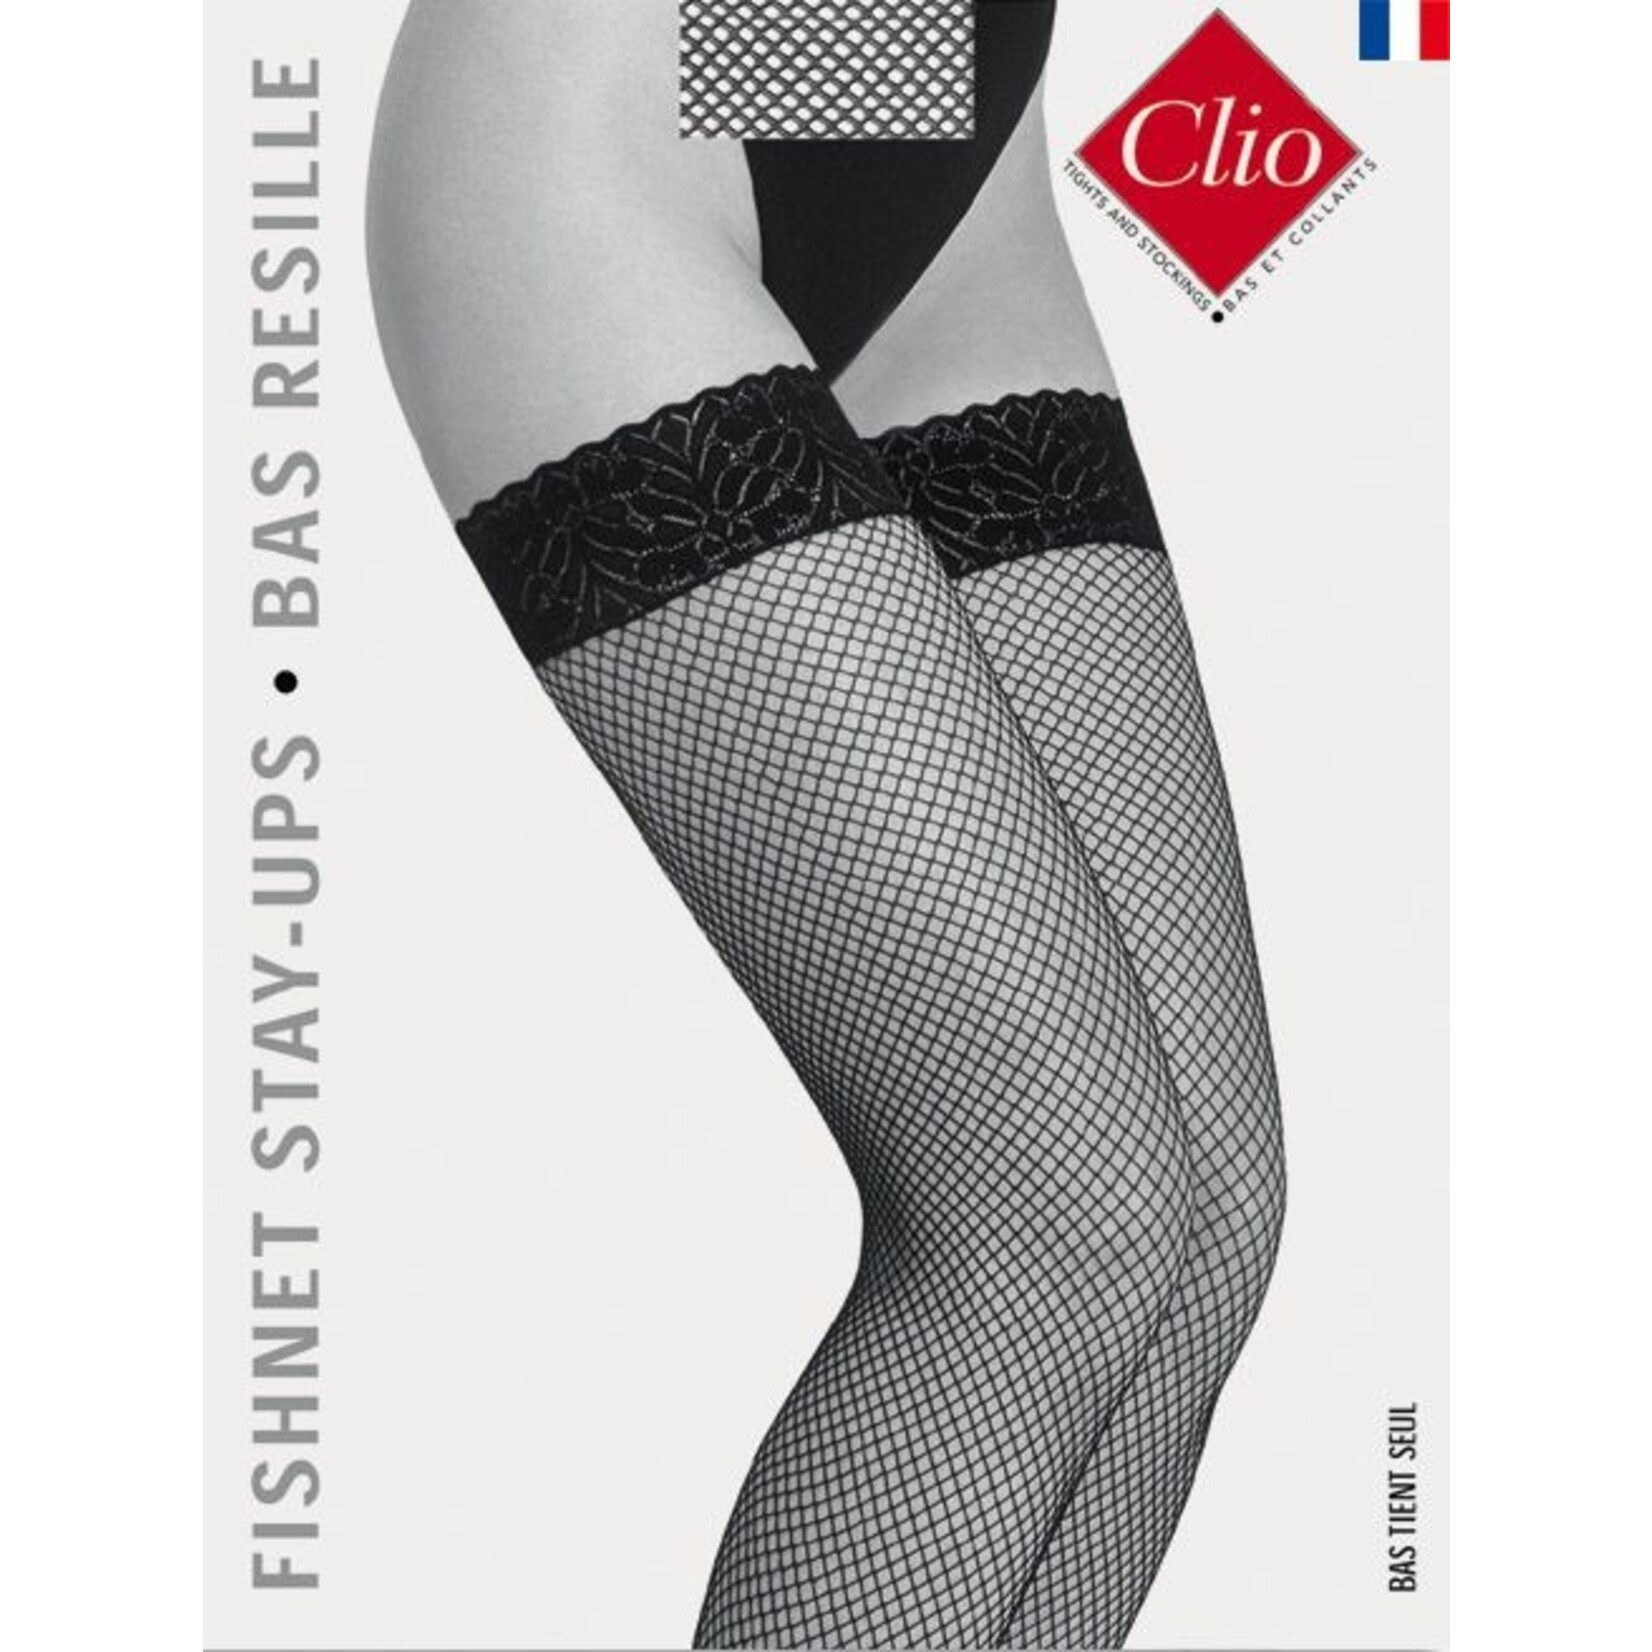 Clio Clio Fishnet Stay Up's with Lace Top